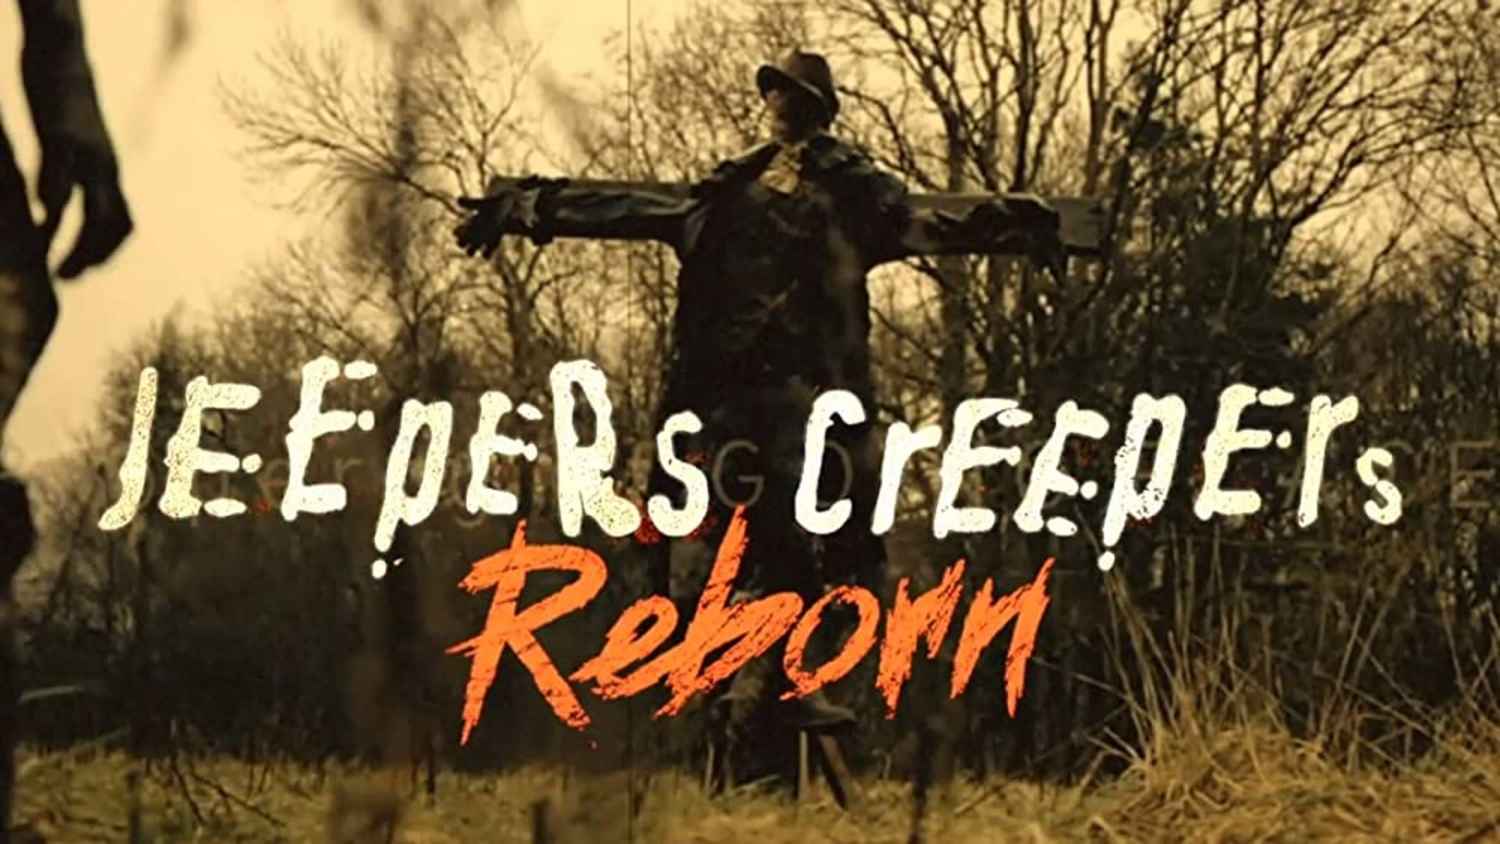 jeepers creepers free movie